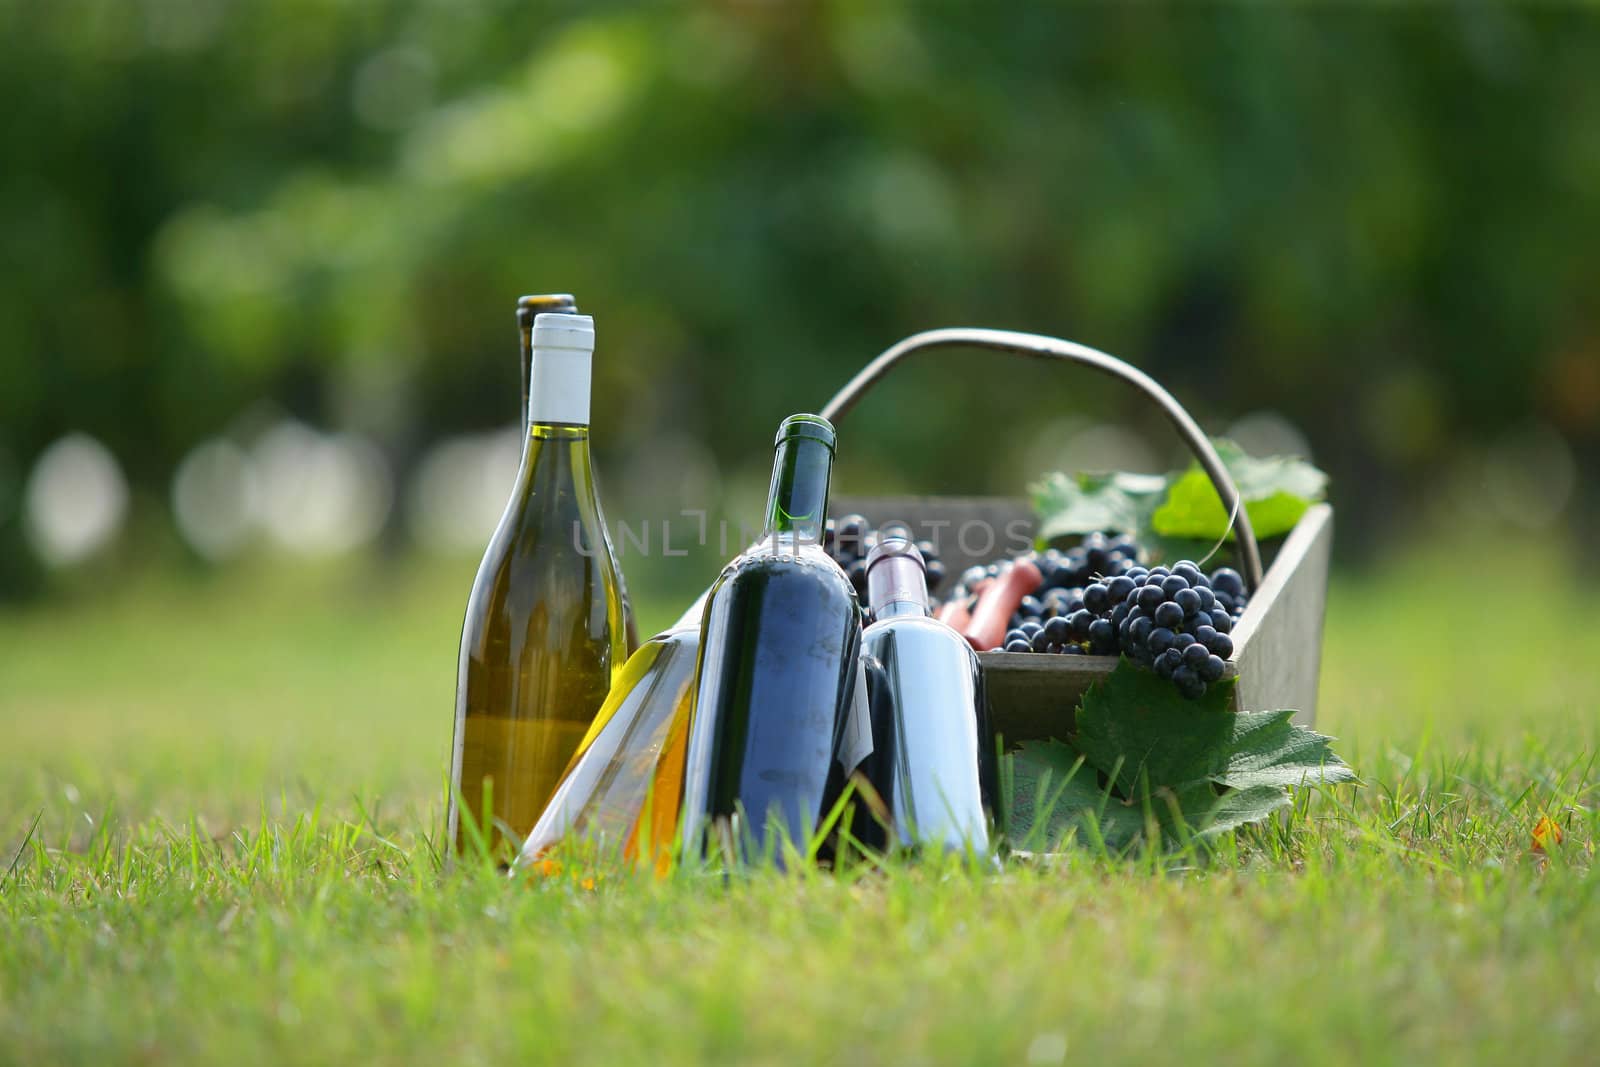 Basket and wine bottles in a field